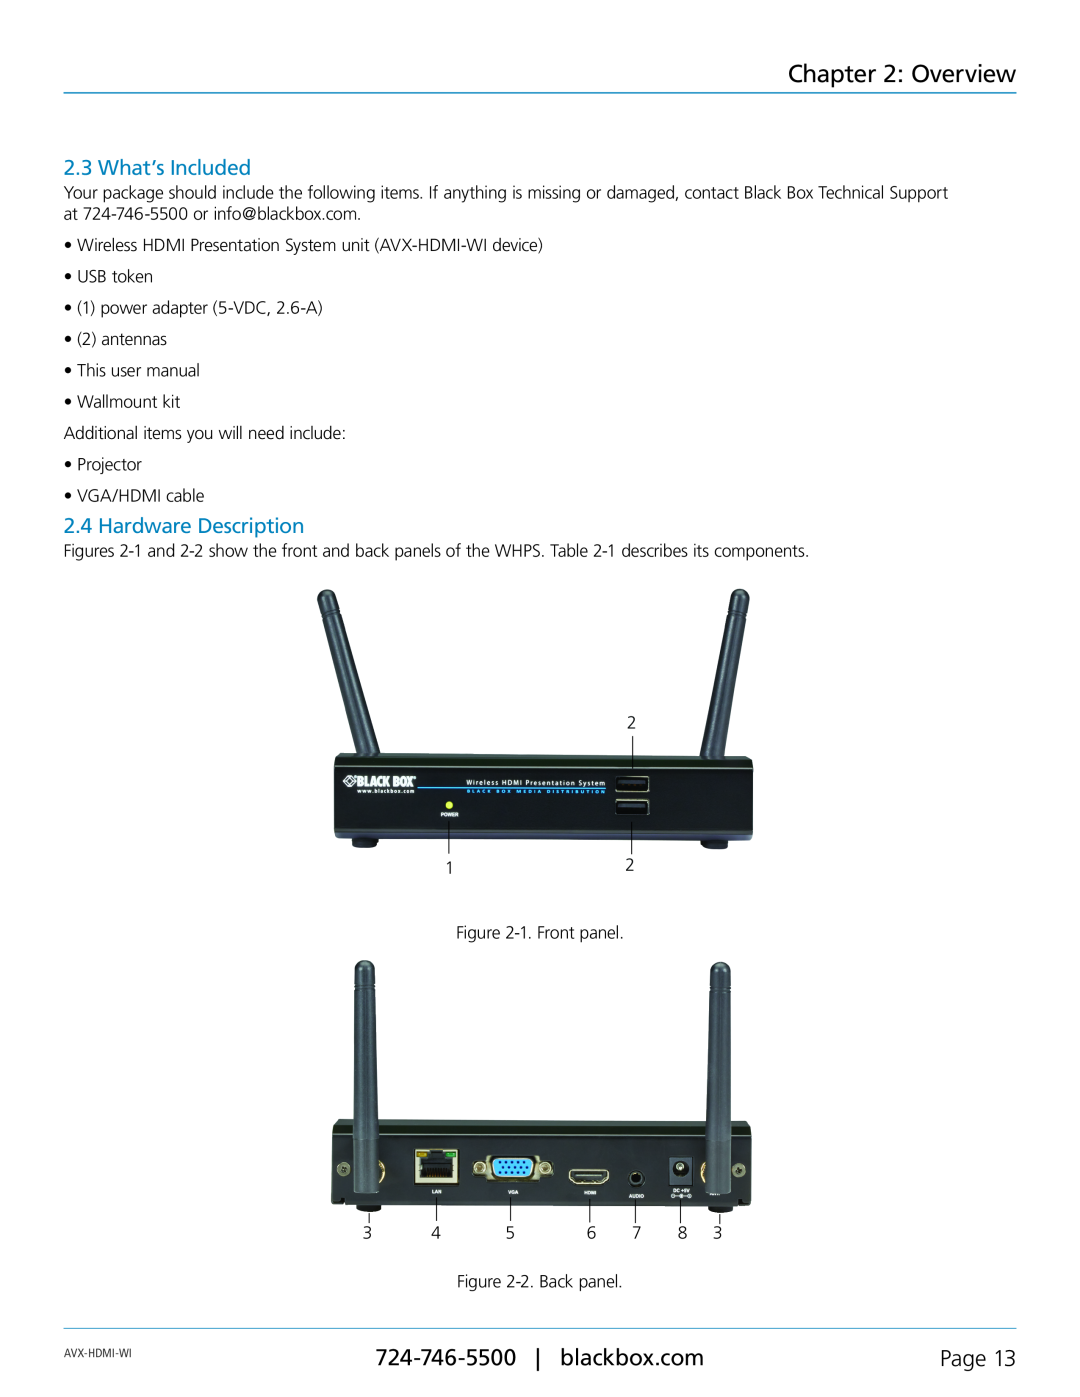 Black Box Wireless HDMI Presentation System (WHPS), AVX-HDMI-WI manual What’s Included, Hardware Description, Overview, Page 